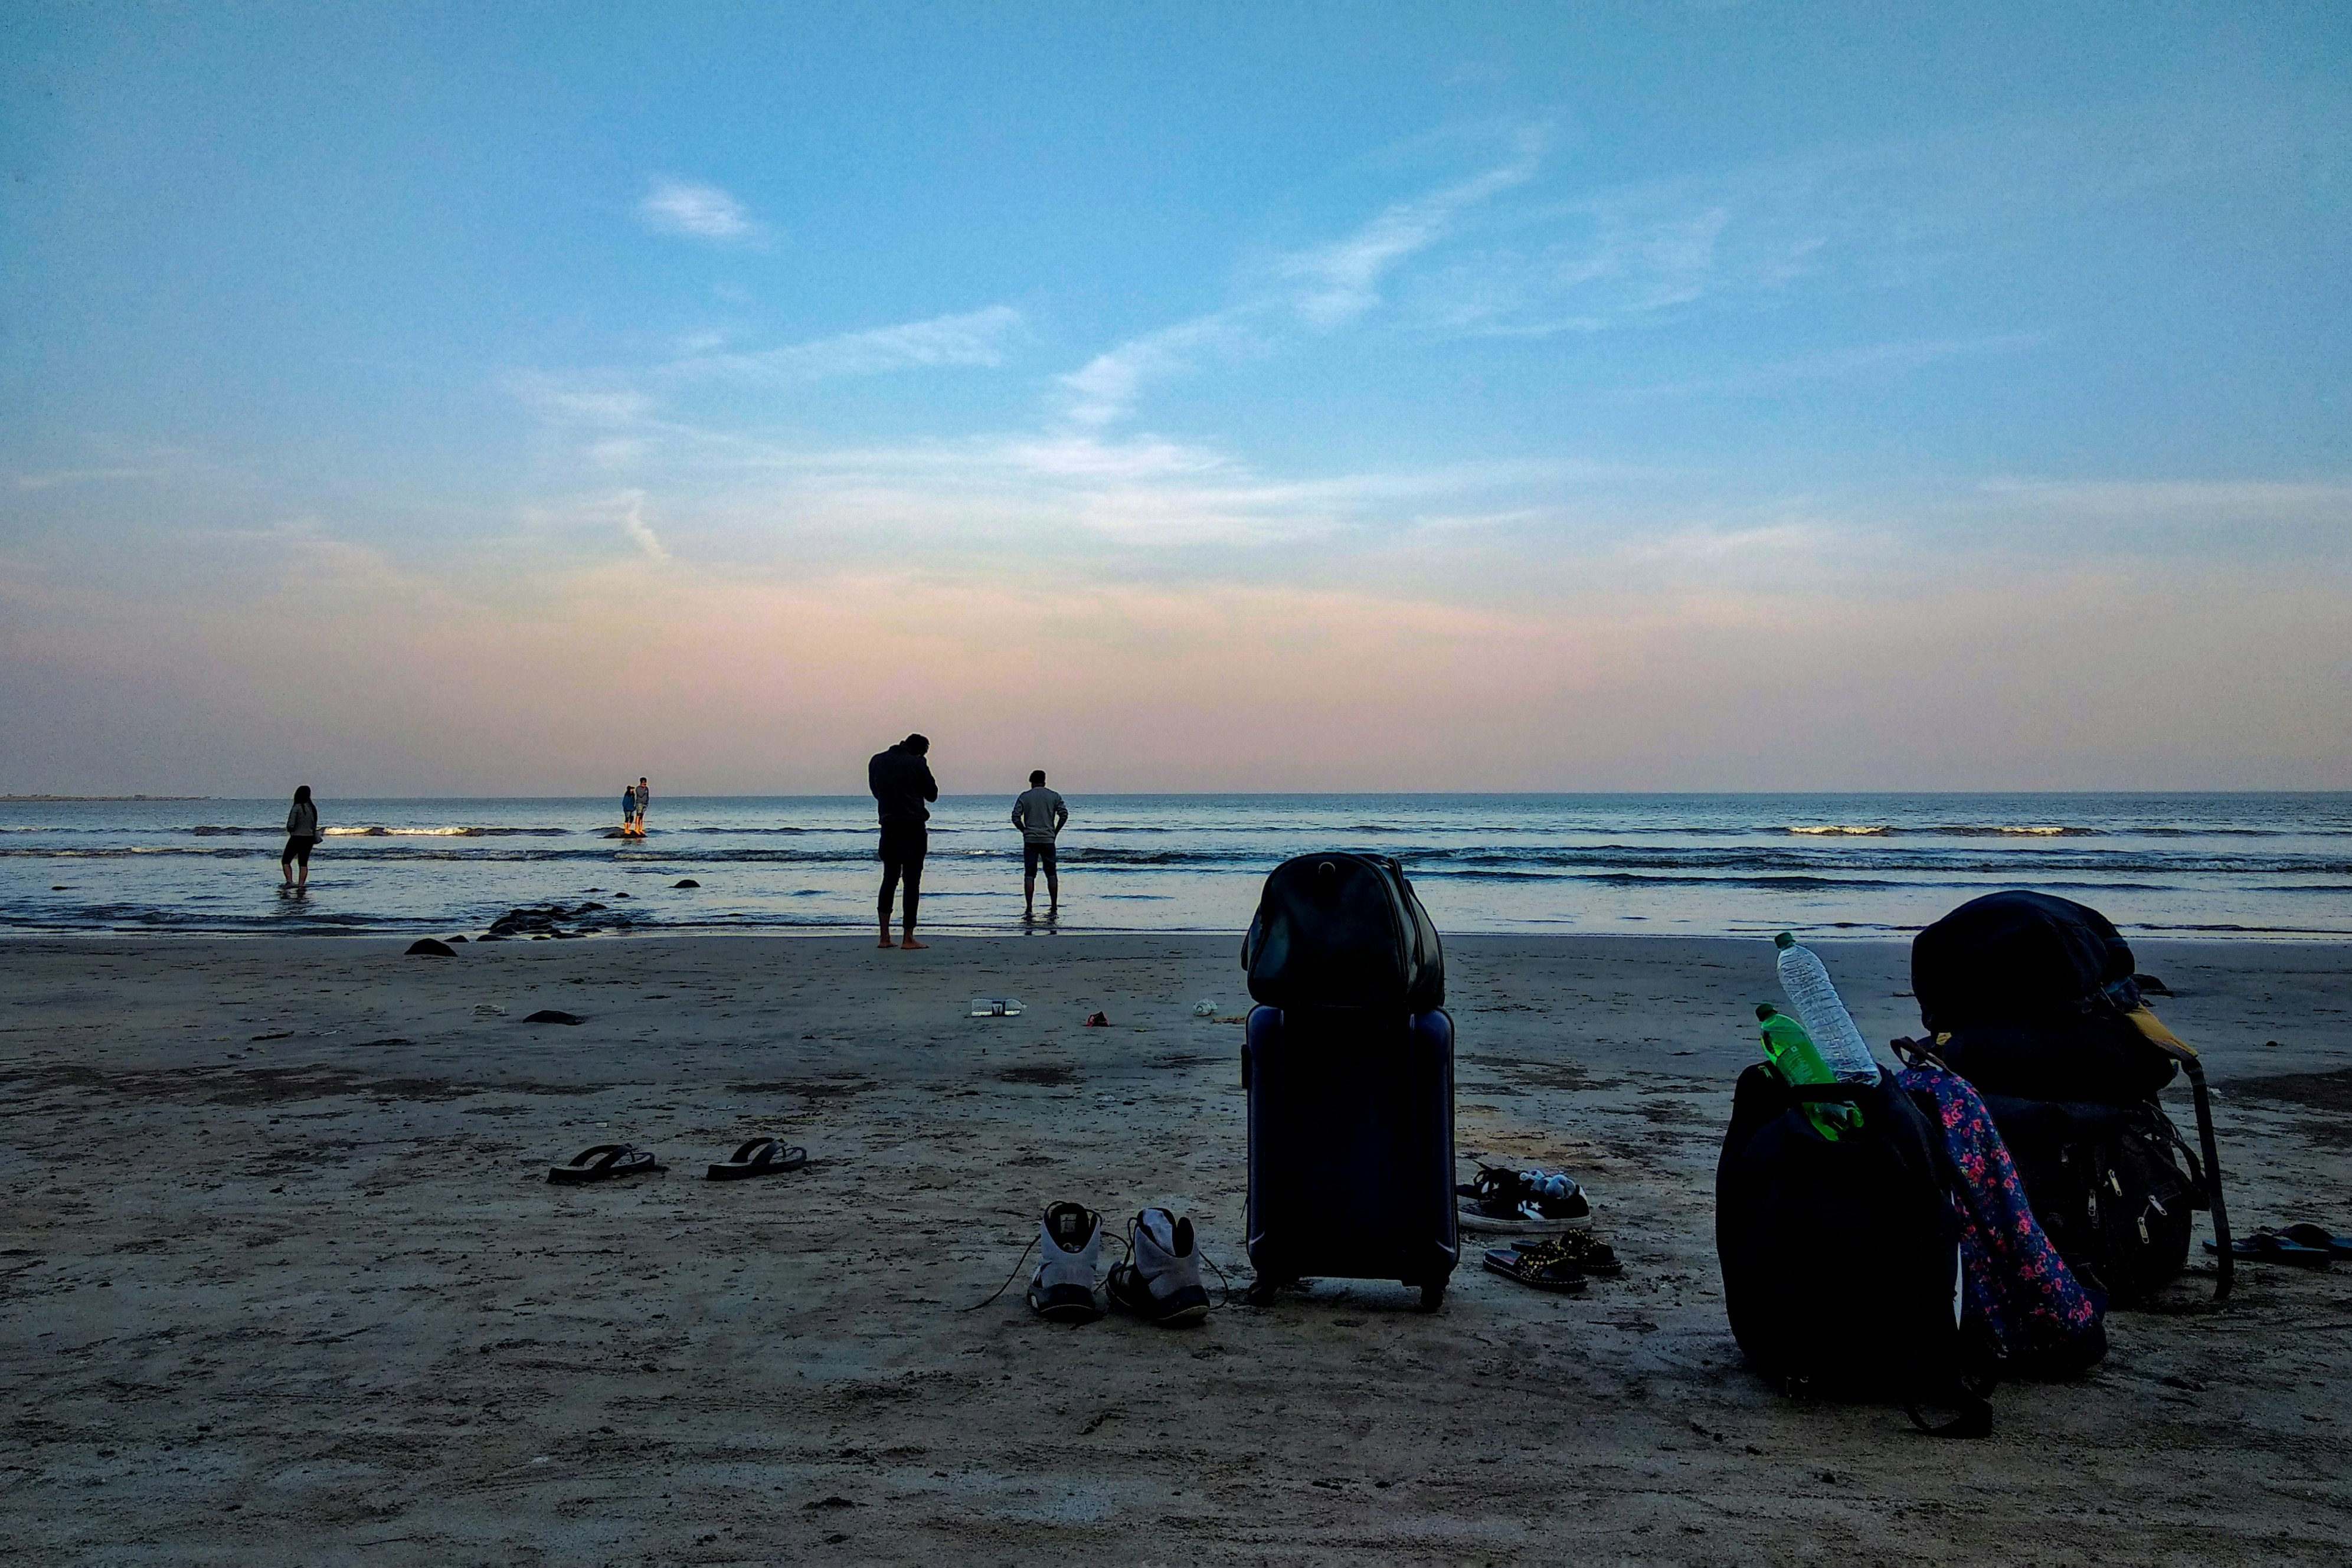 Two people paddle in the shallows at Mandwa Beach, near Mumbai. The pair's belongings, including a bag and some shoes, sit on the sand in the foreground.